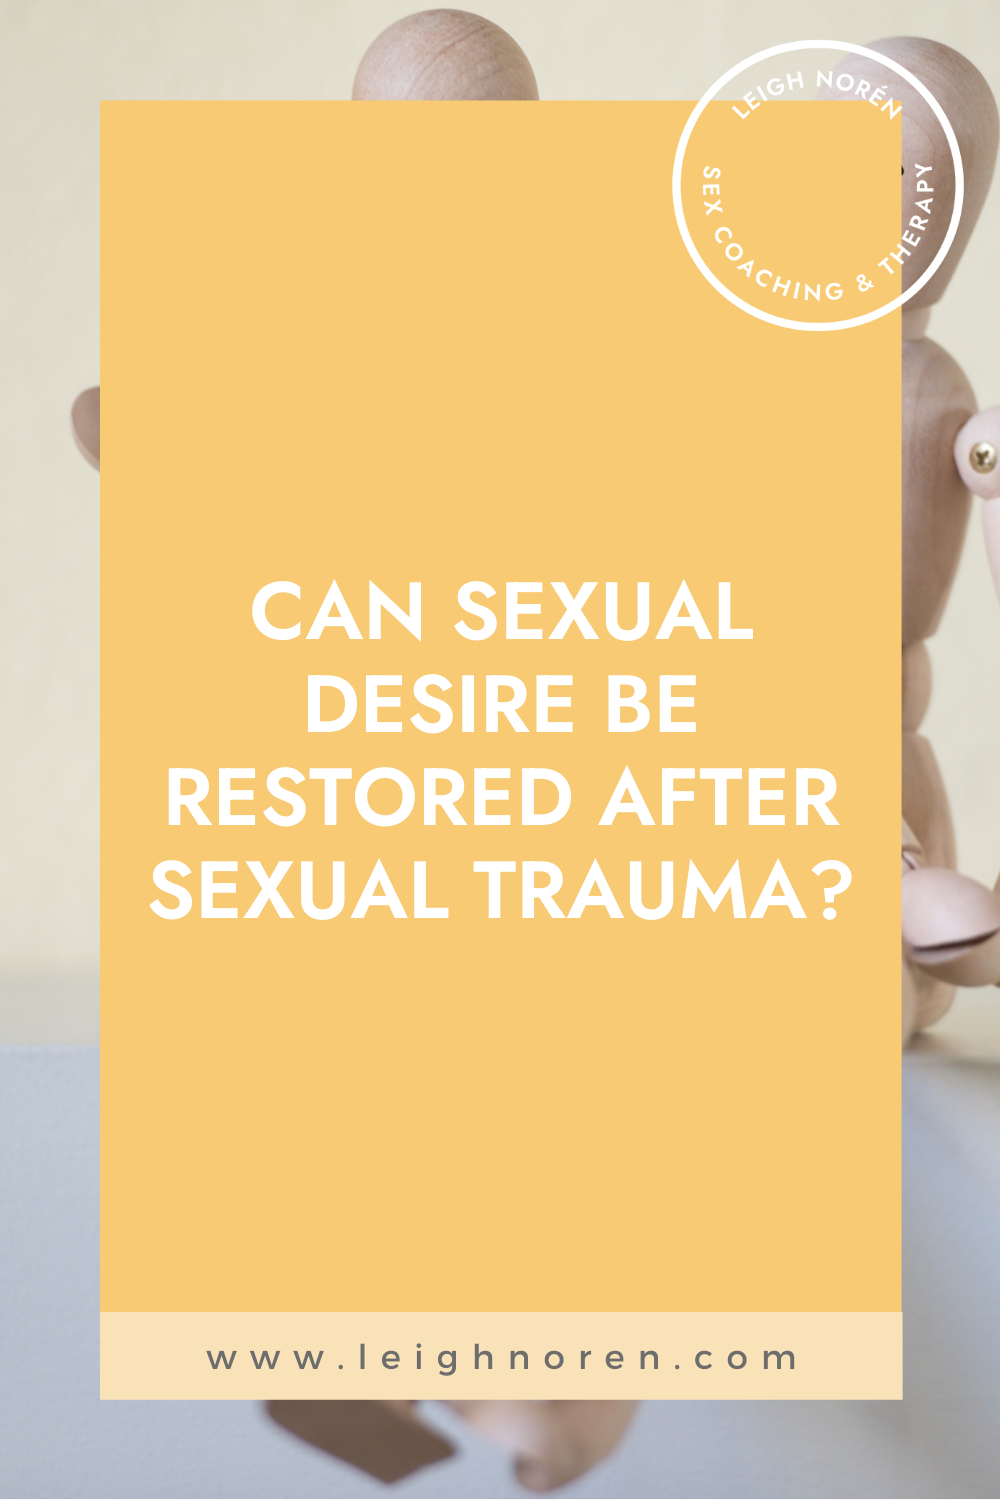 Can Sexual Desire Be Restored After Sexual Trauma?